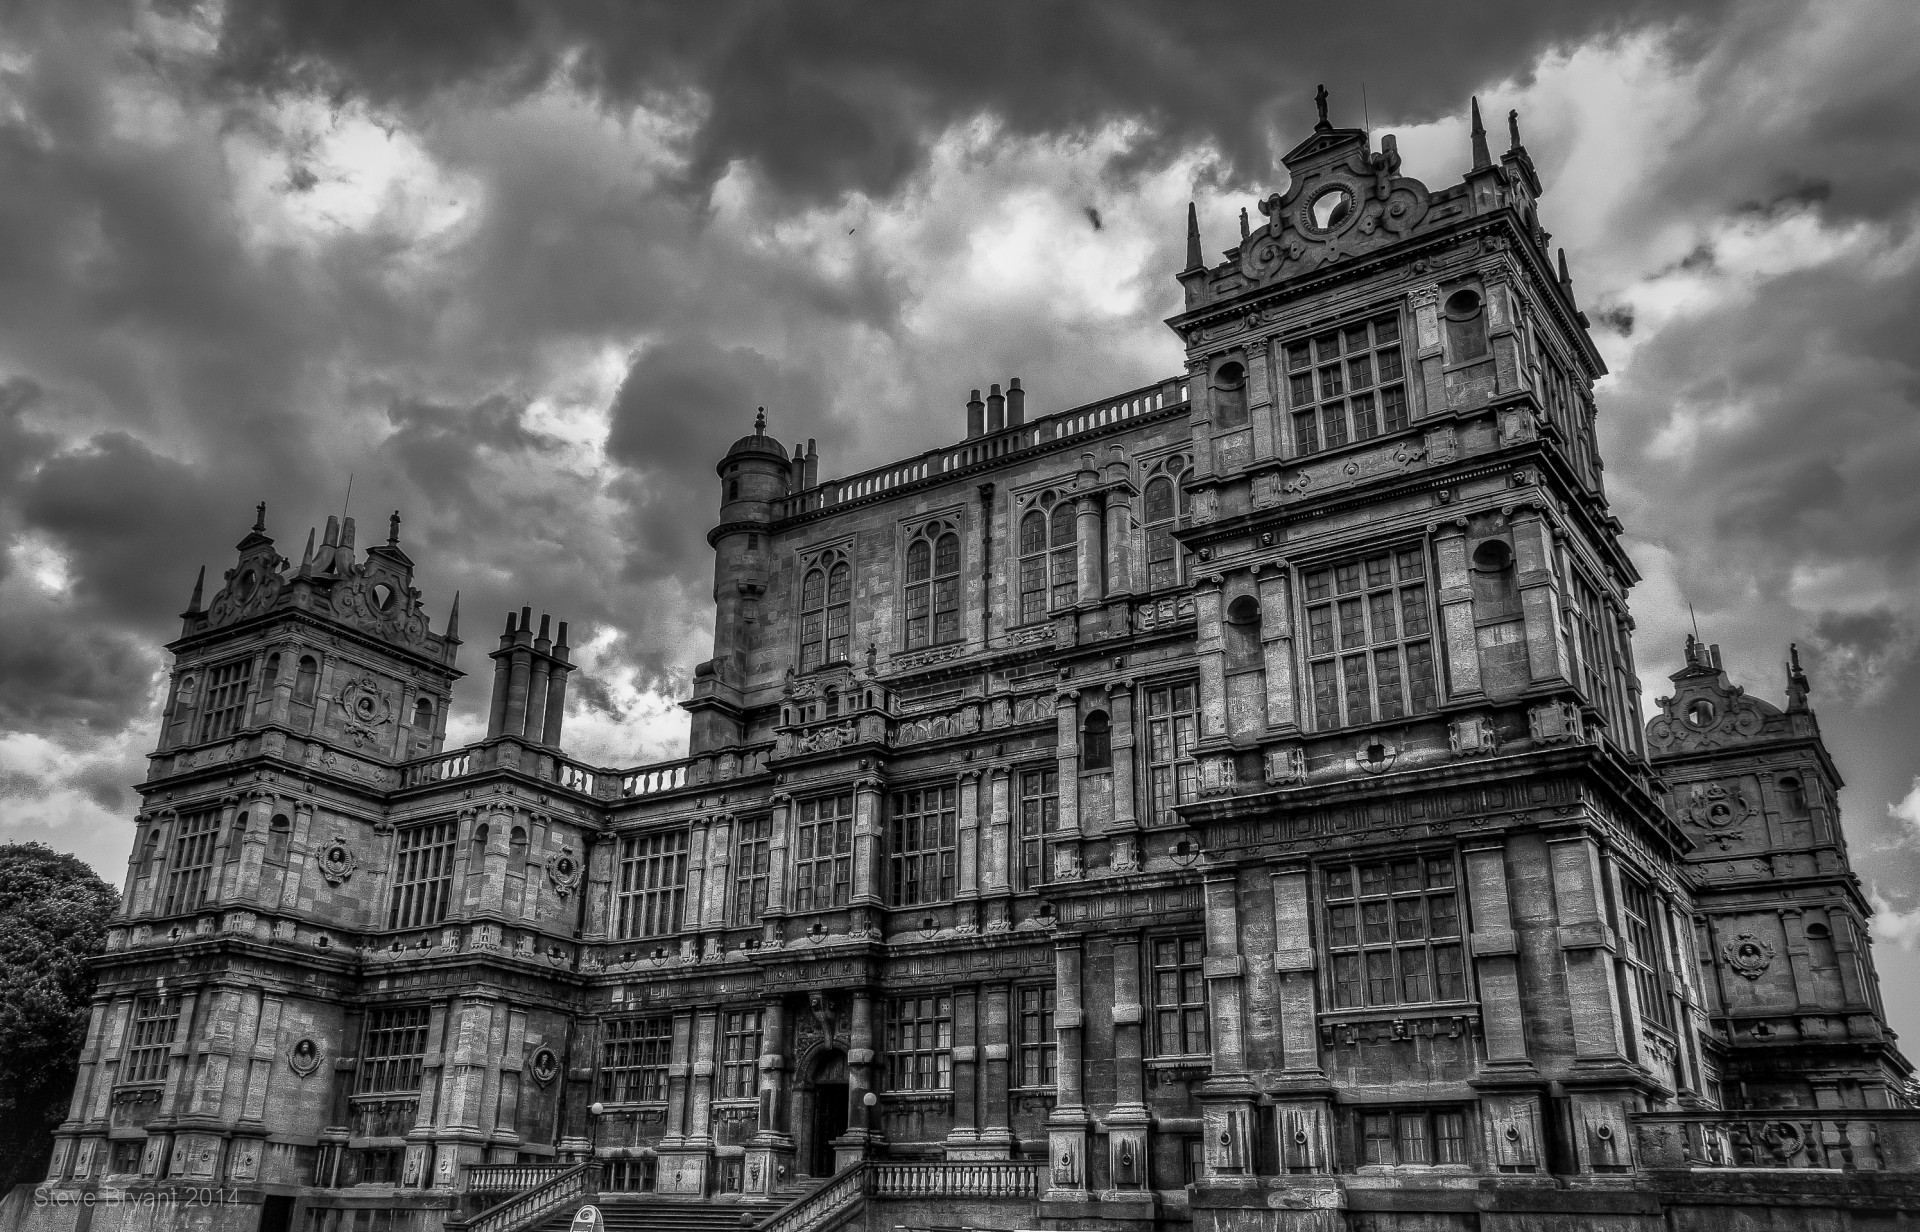 Wollaton Hall in Nottinghamshire uk used as Wayne Manor in the " The Dark Knight Rises "